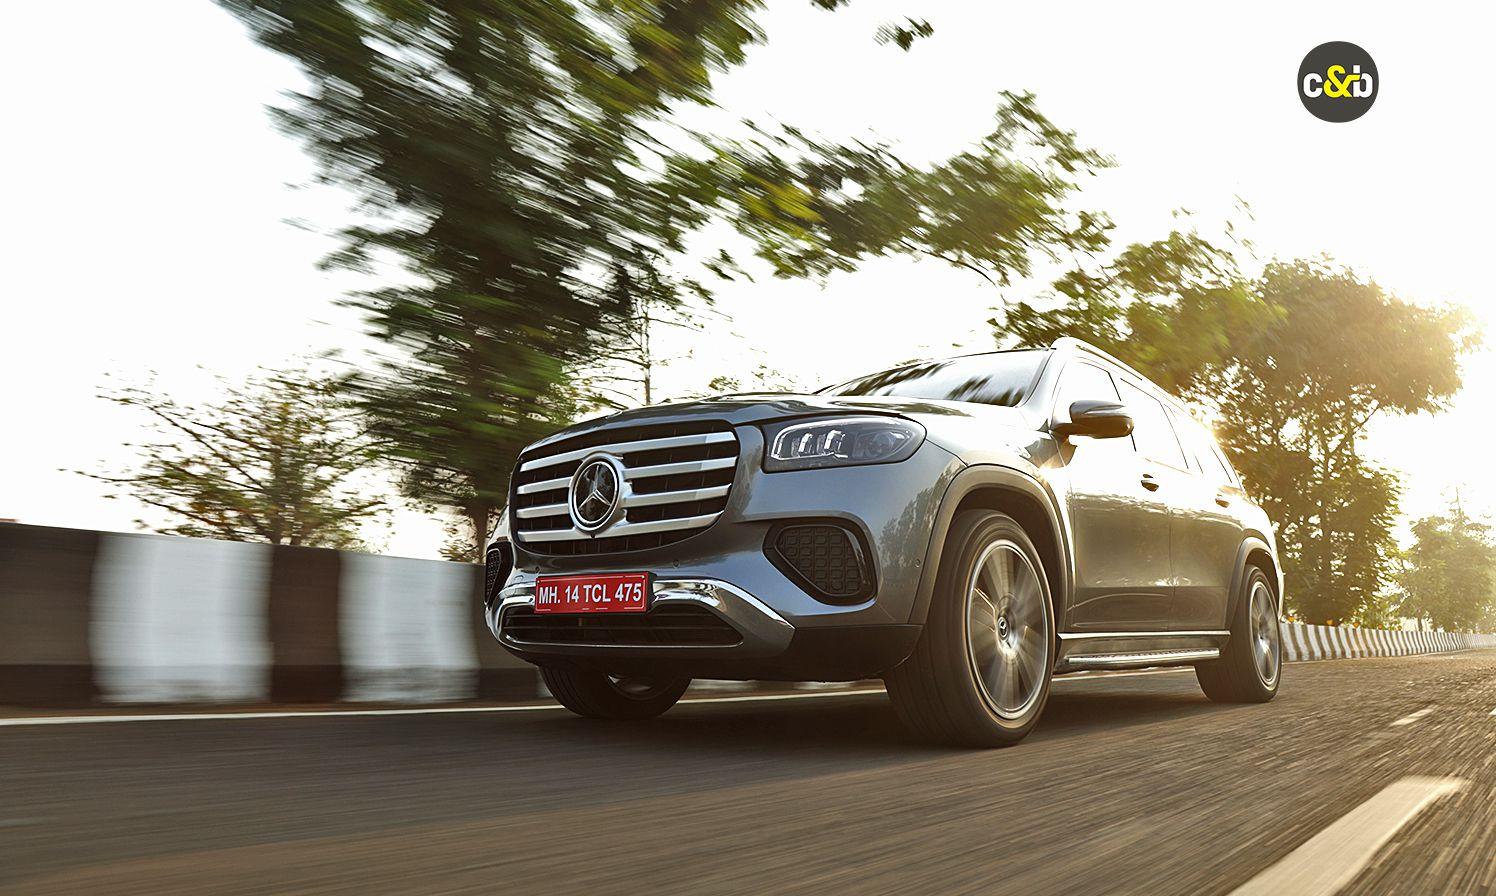 The Mercedes-Benz GLS facelift comes with updated styling, improved creature comforts and new tech. I spent a day with it to find out what has changed and if this flagship is really a better product than it was before. 